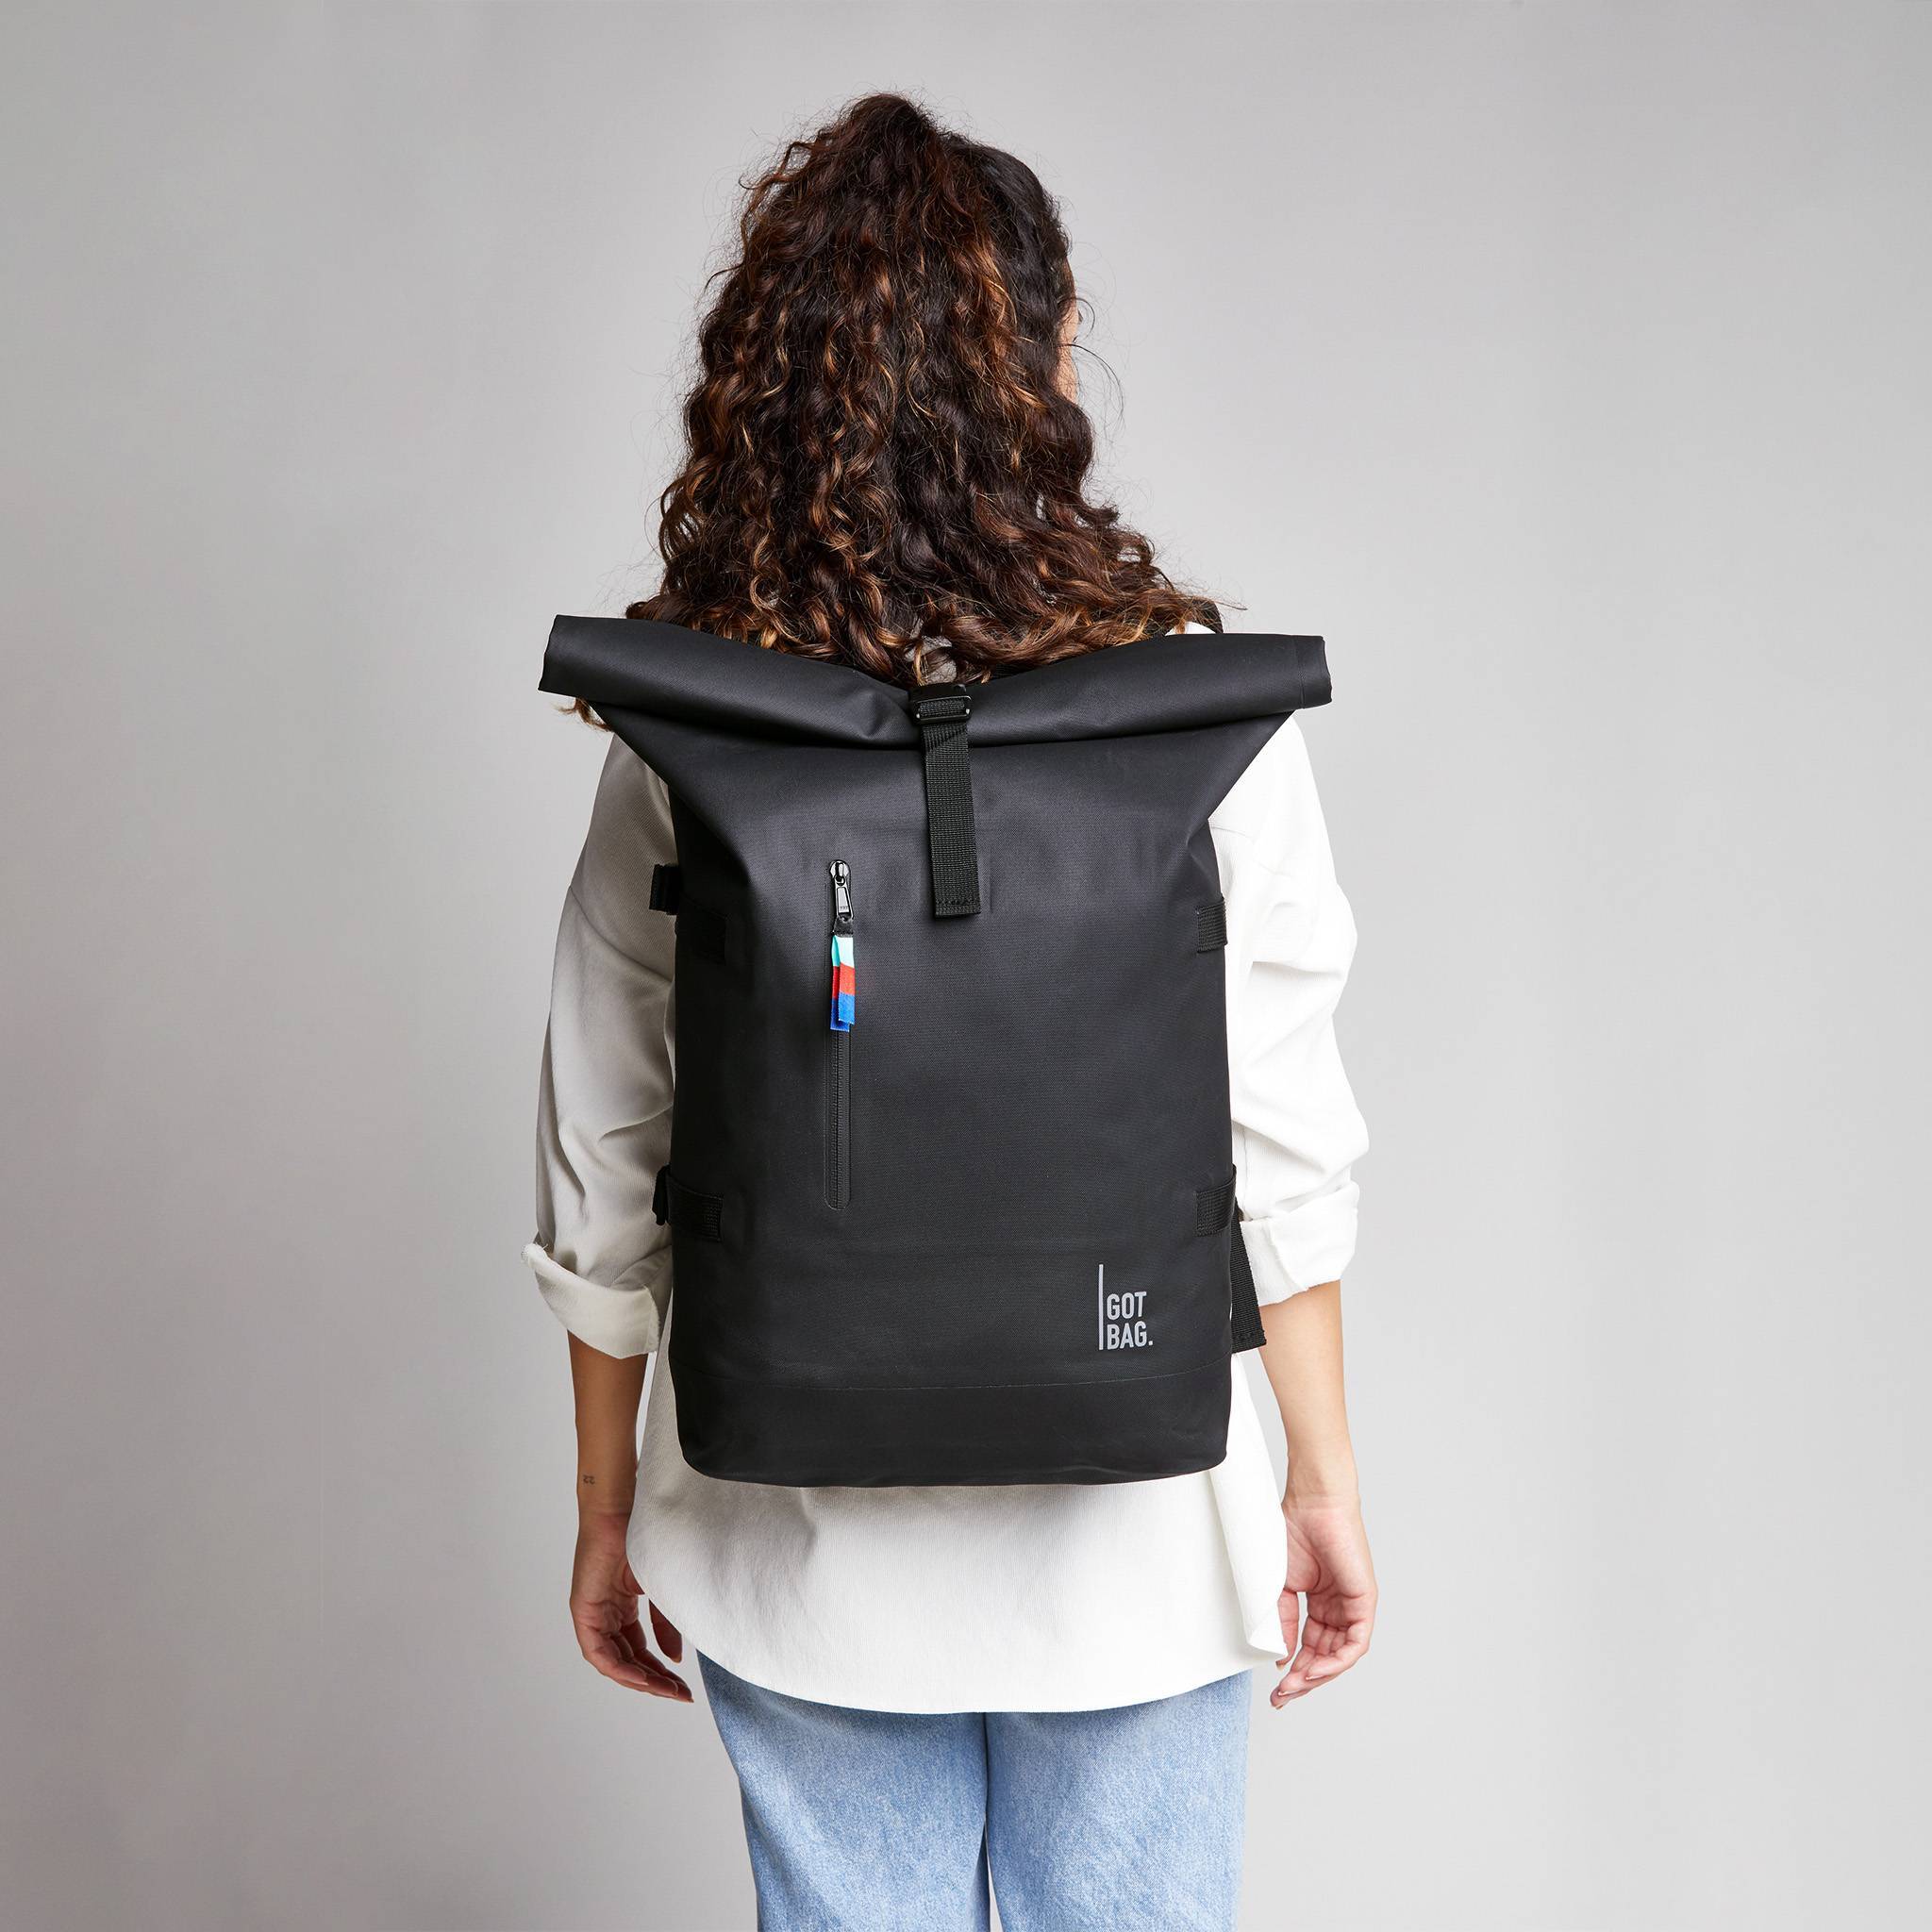 GOT BAG - 🌊We are a start-up from Germany and we produce backpacks made of  ocean plastic. For every travel companion sold, a step forward is made to  sensitize people to a